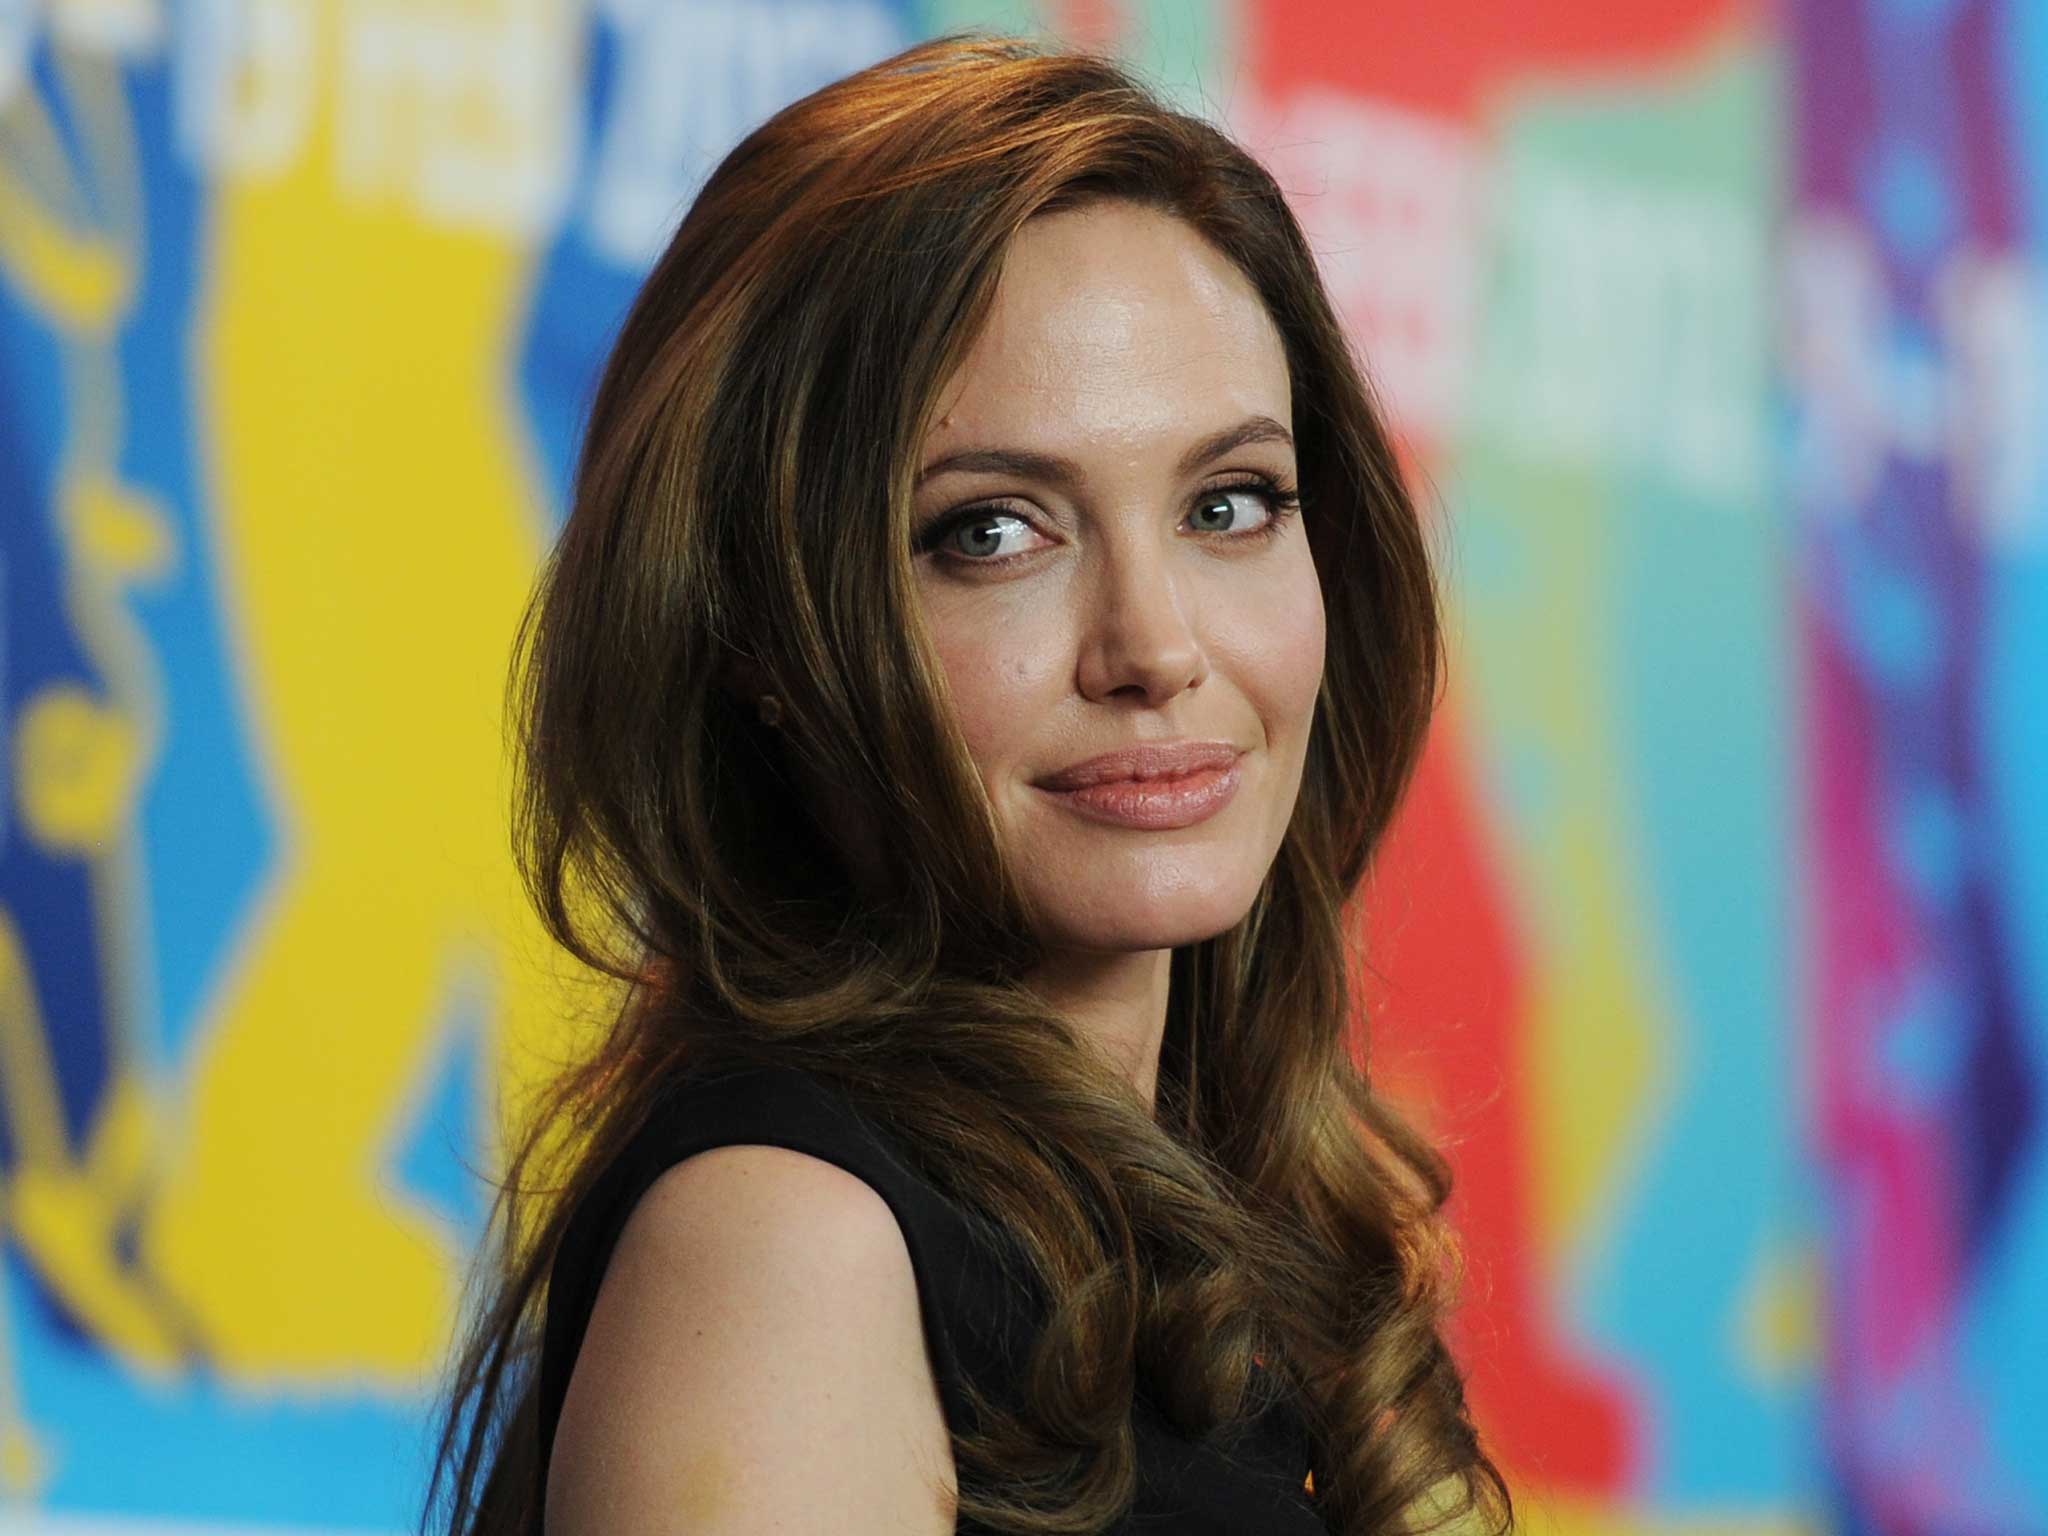 Angelina Jolie went back to work just four days after her double mastectomy